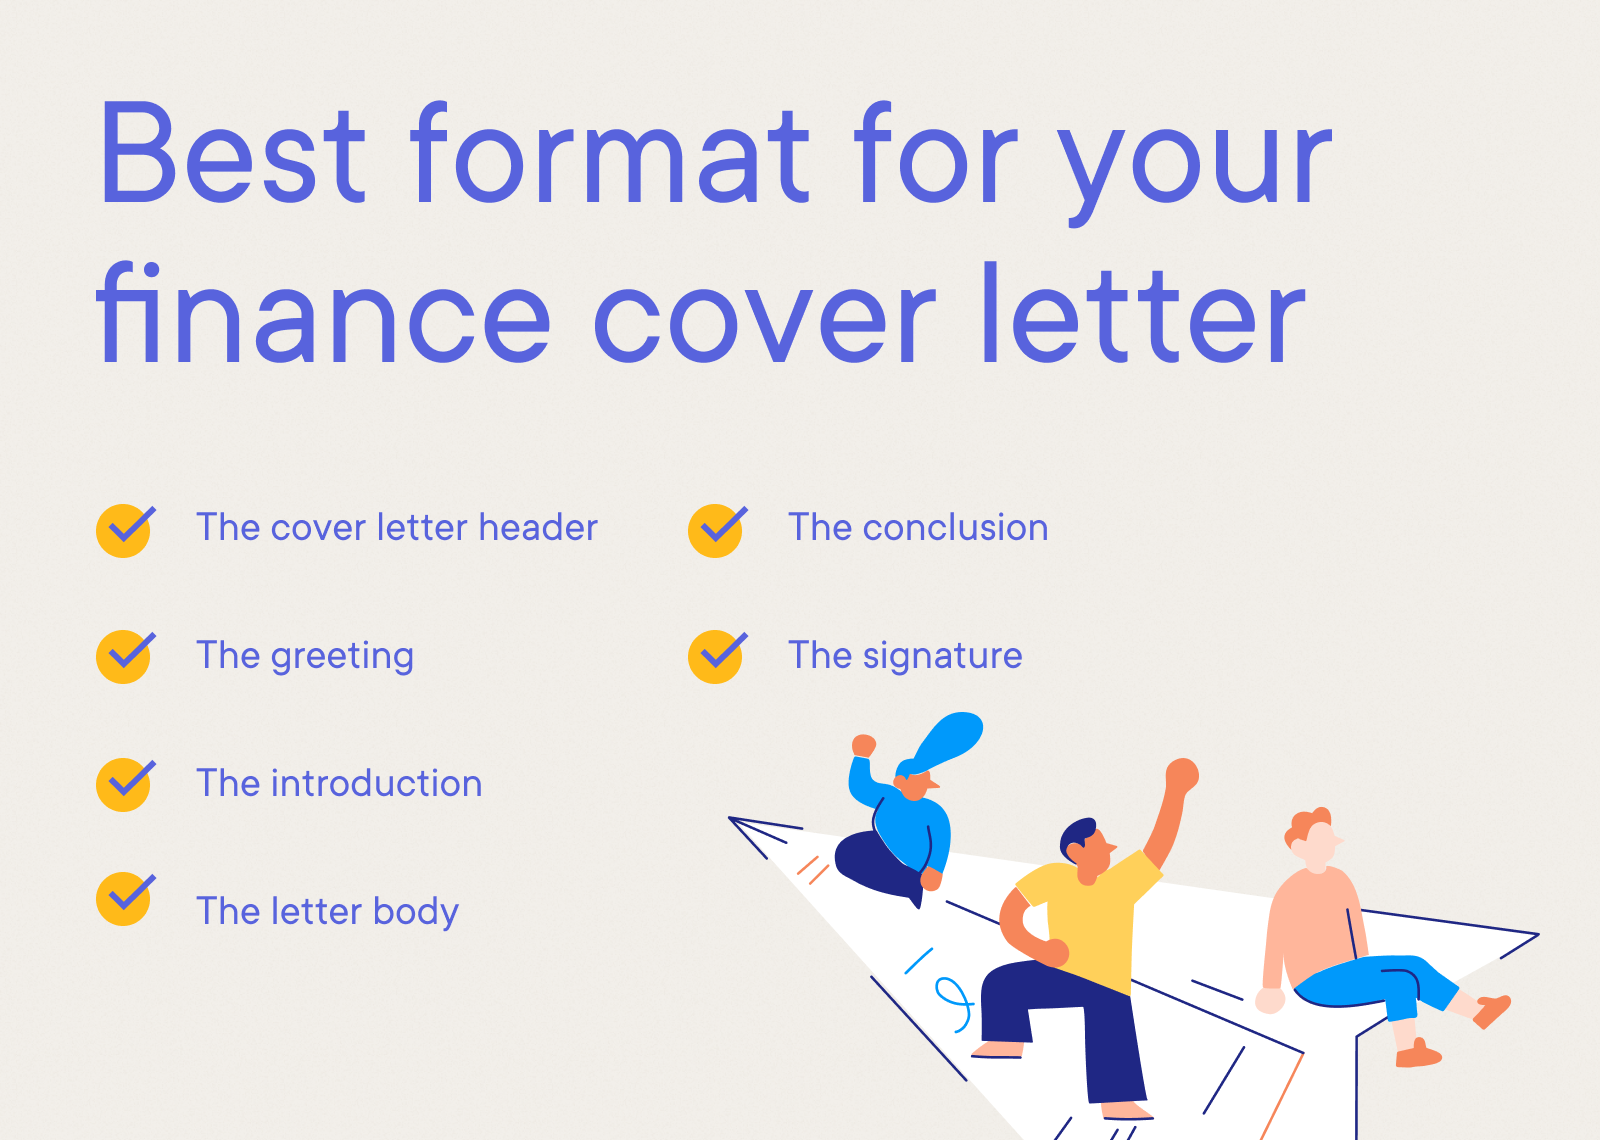 Finance - Best format for your finance cover letter